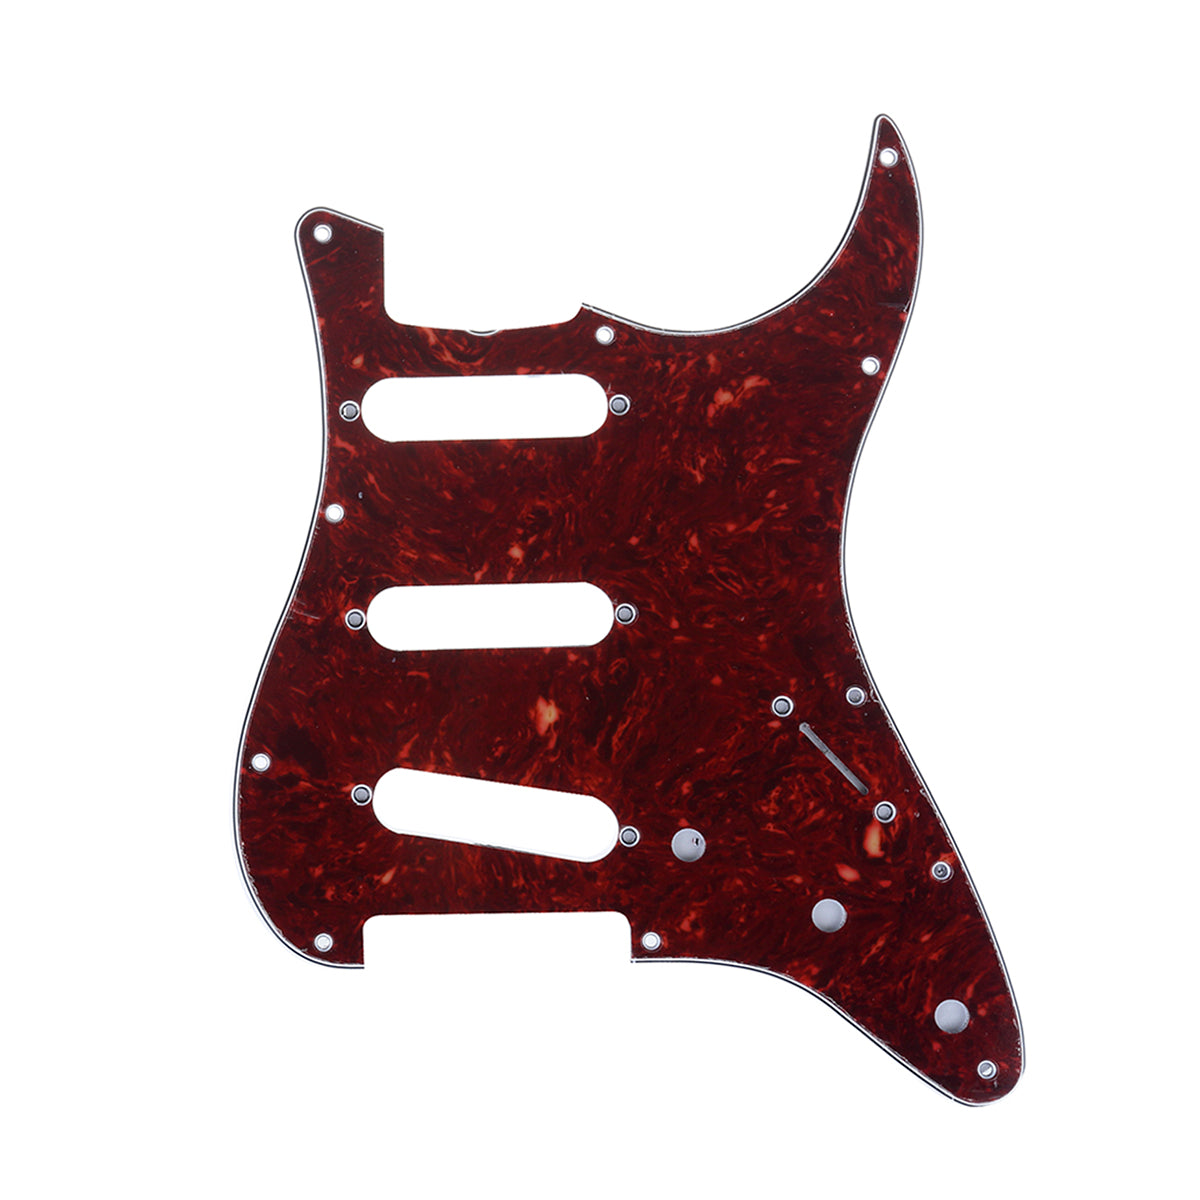 Musiclily Pro 11-Hole 62 Vintage Style SSS Strat Guitar Pickguard for American Stratocaster 62, 4Ply Vintage Tortoise